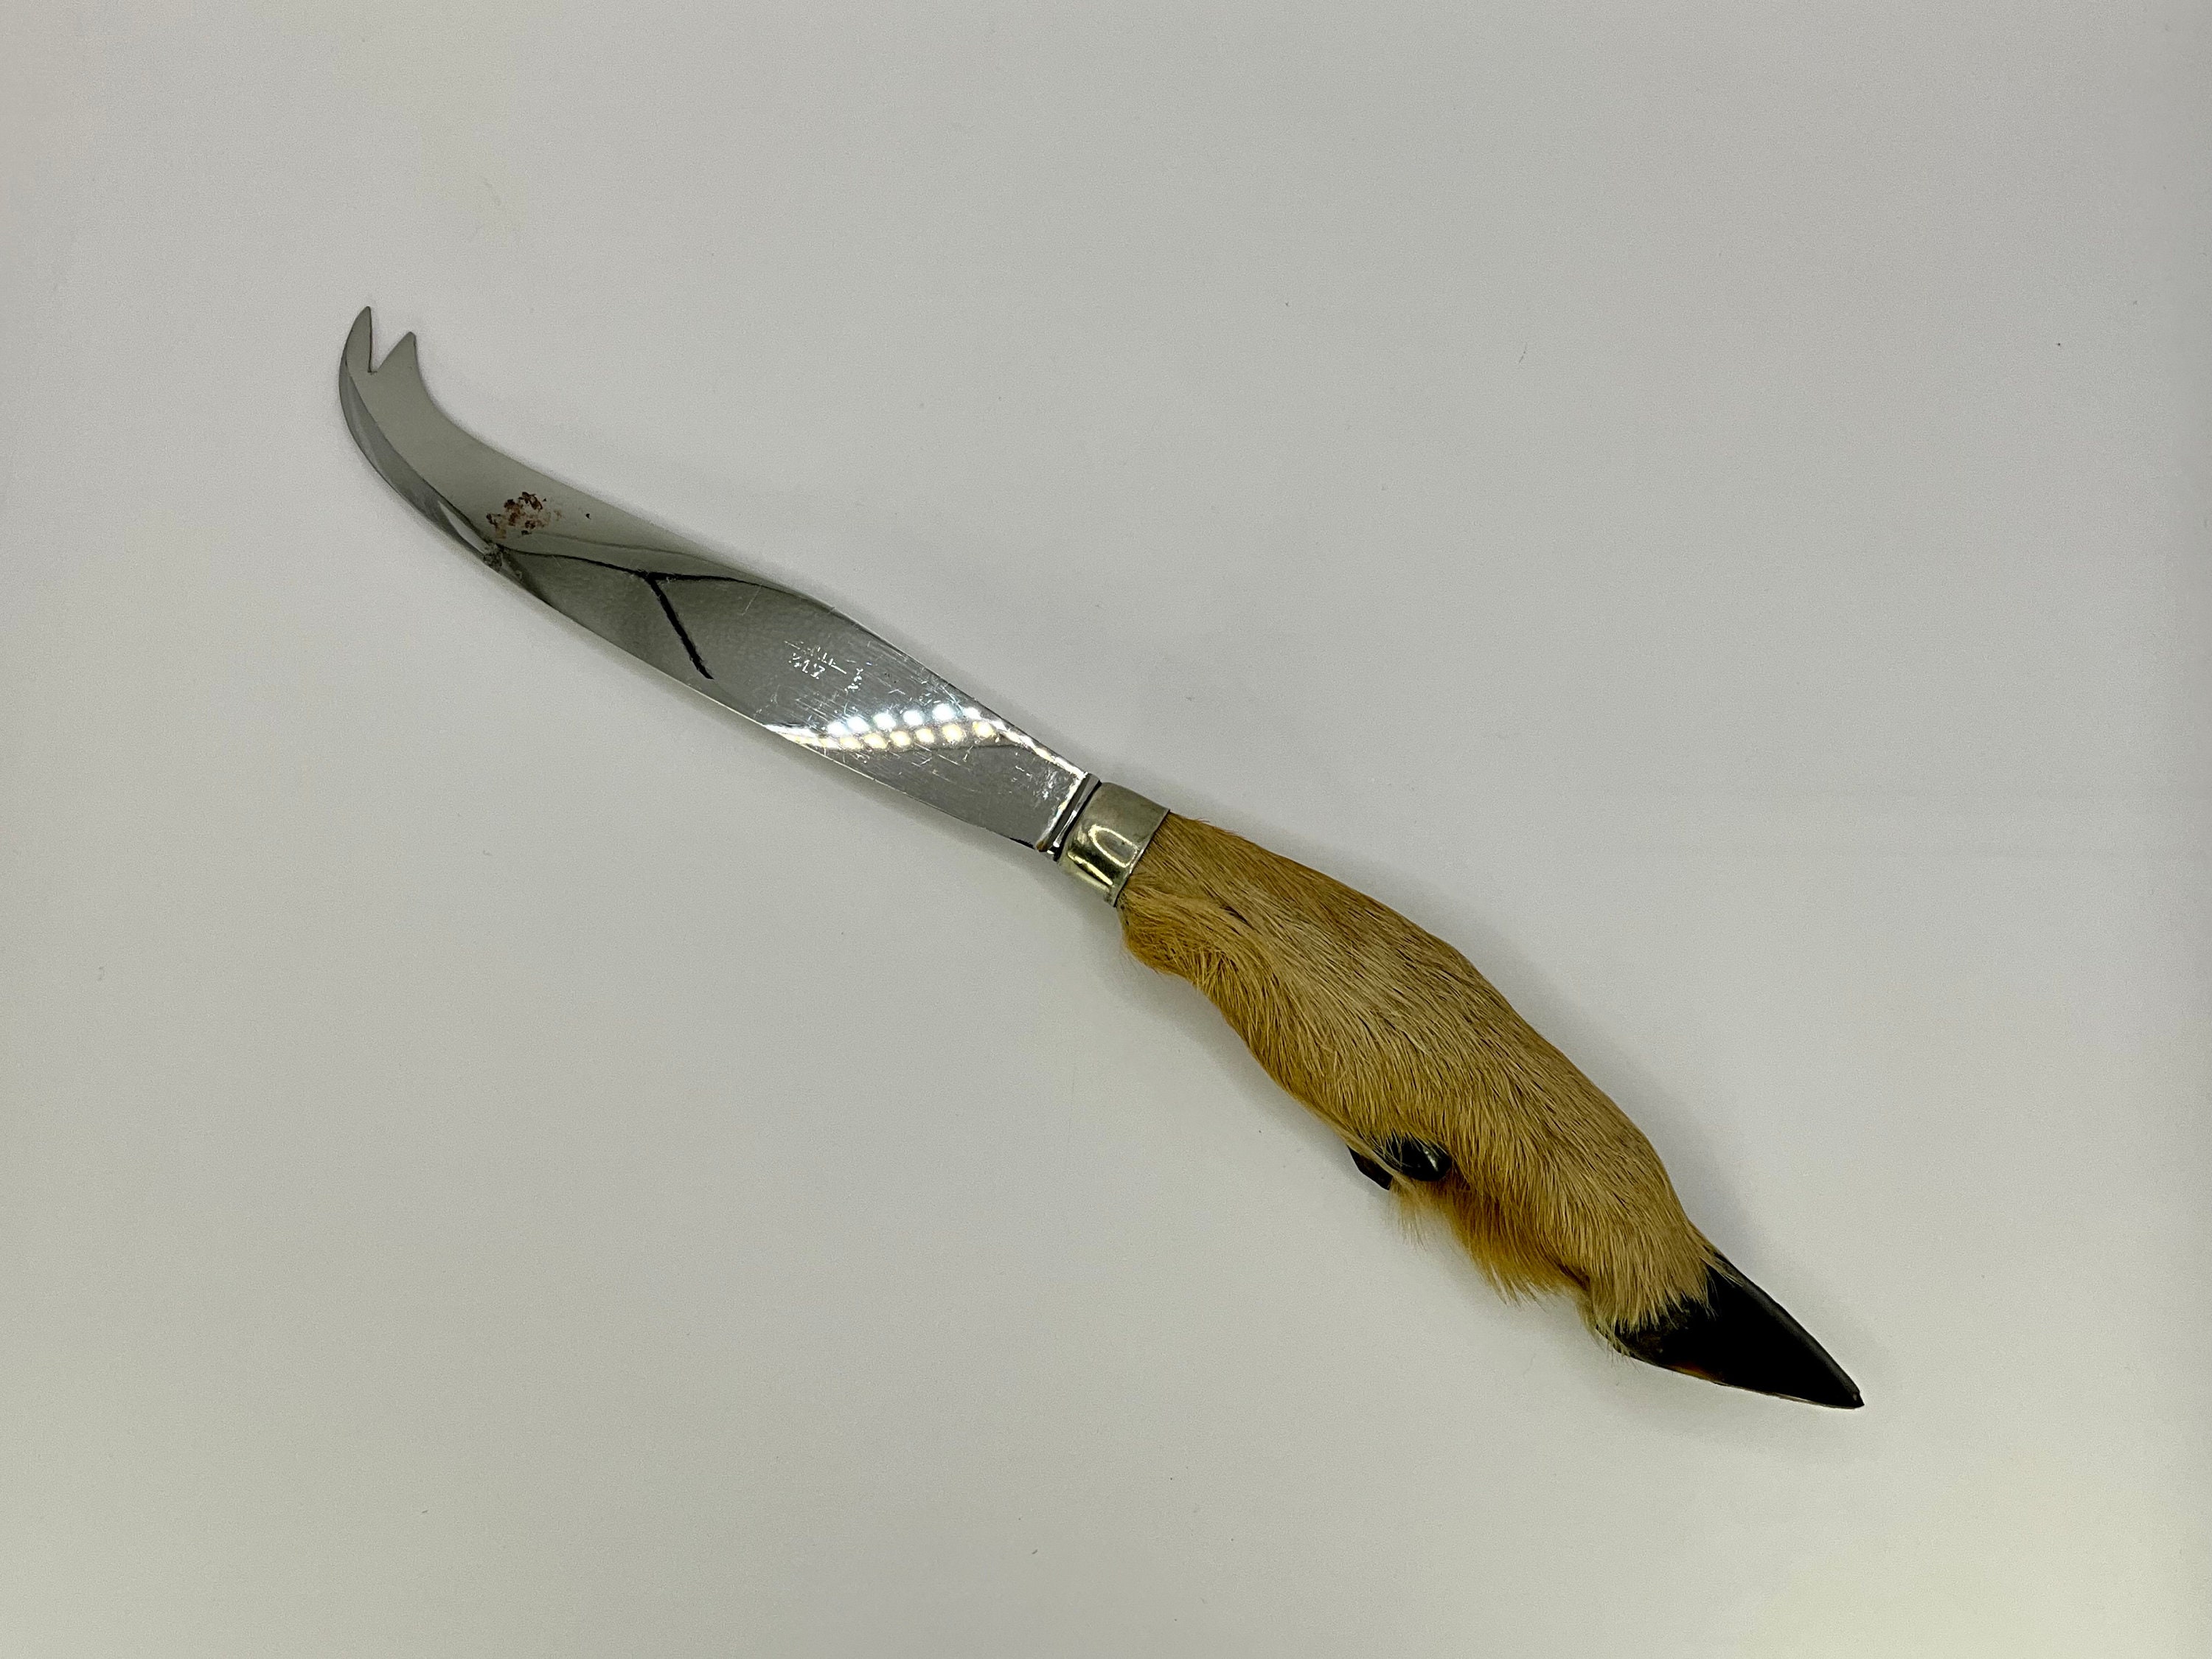 Knife and Fork THIERS Handle Deer Foot Doe Knife Cutting Table Art